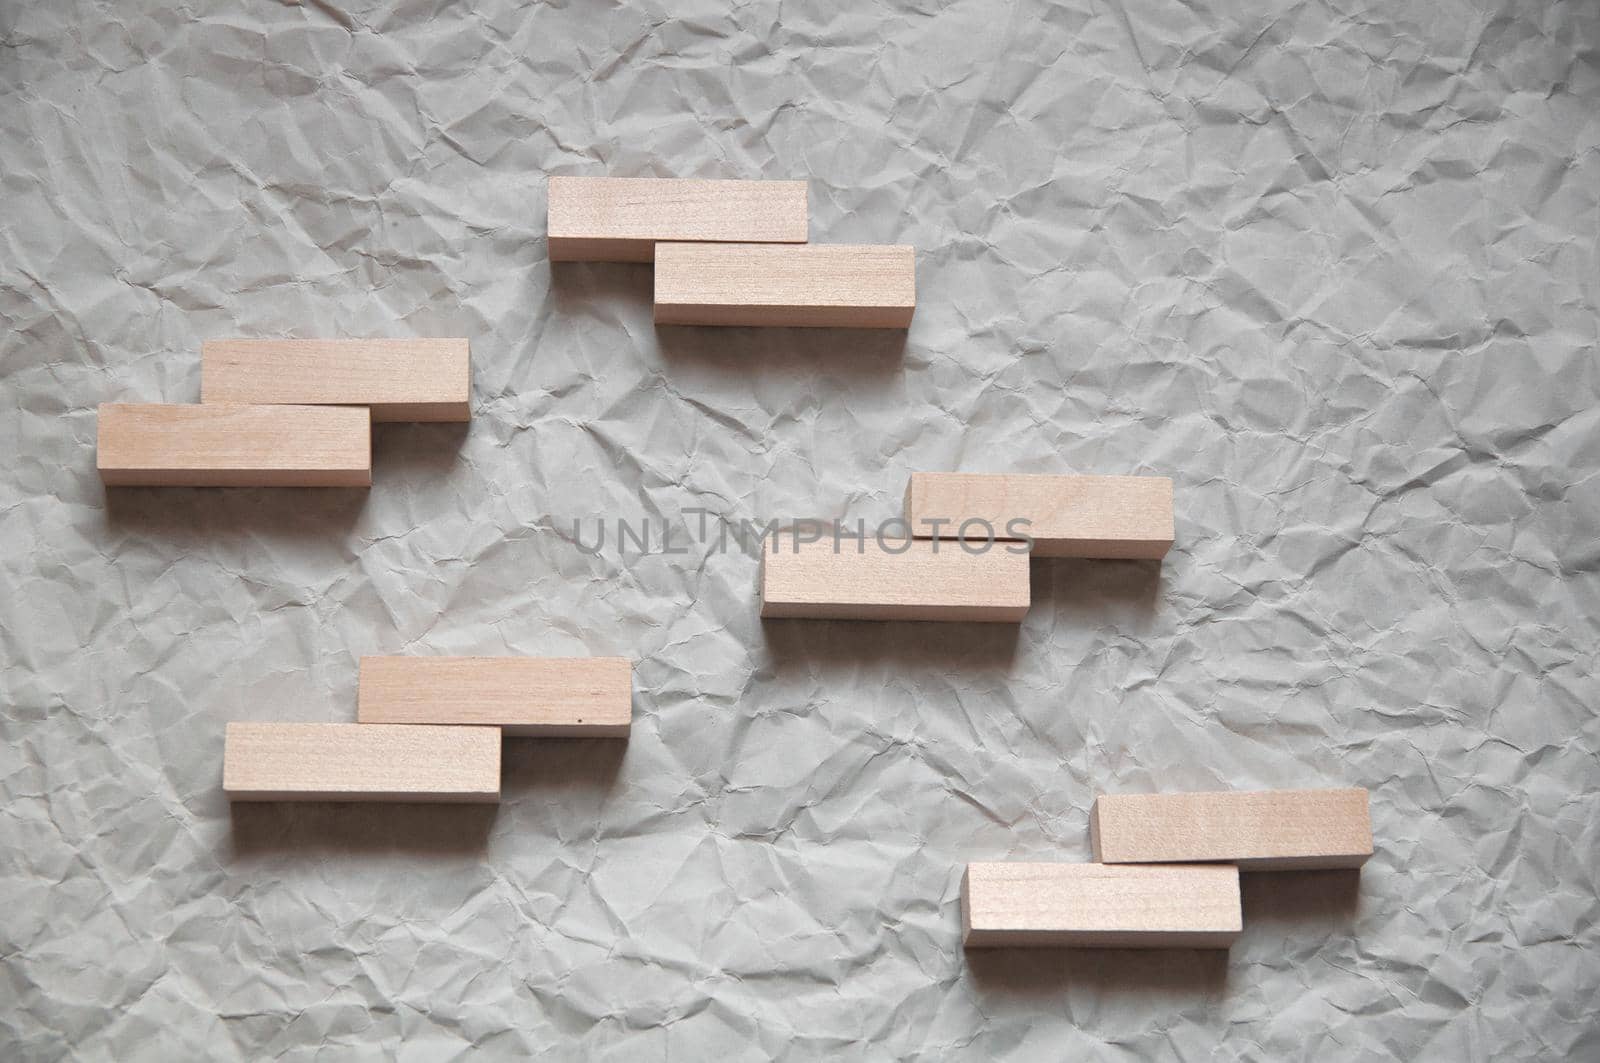 background of crumpled craft paper with wooden rectangles arranged in a certain order in a minimalist style